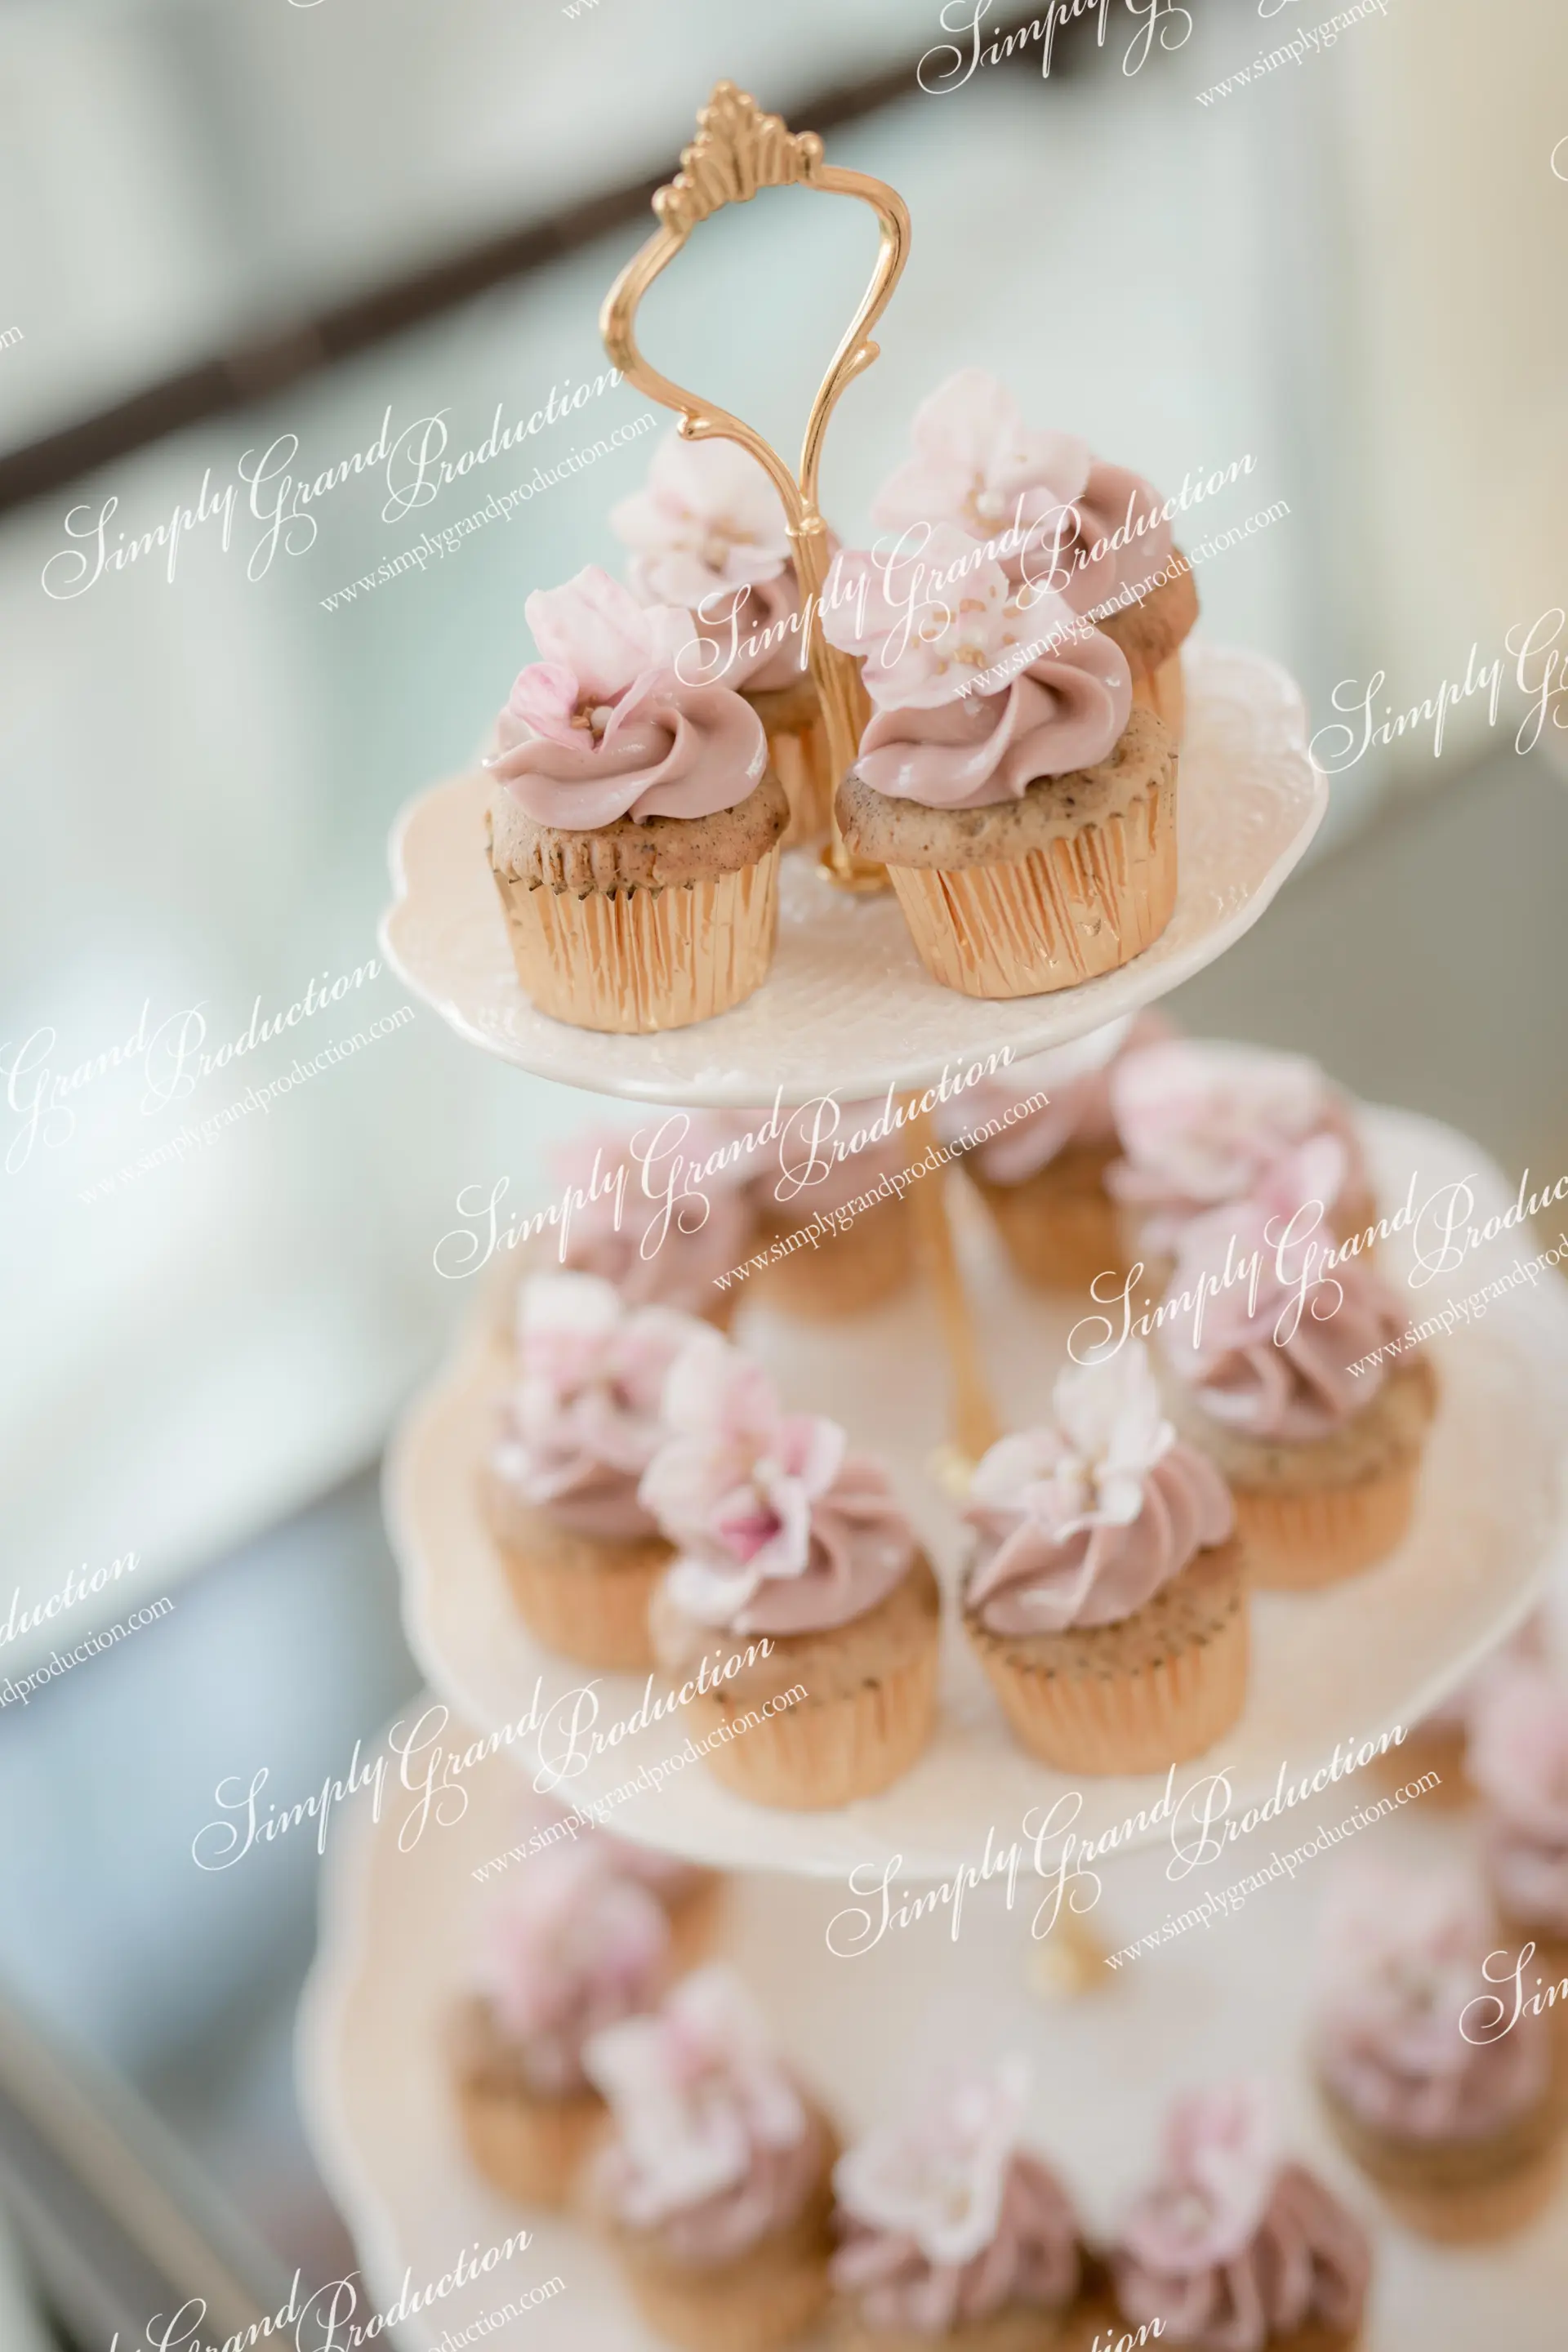 Simply_Grand_Production_wedding_decoration_dessert_table_delicate_weddingsweet_Four_Seasons_1_15